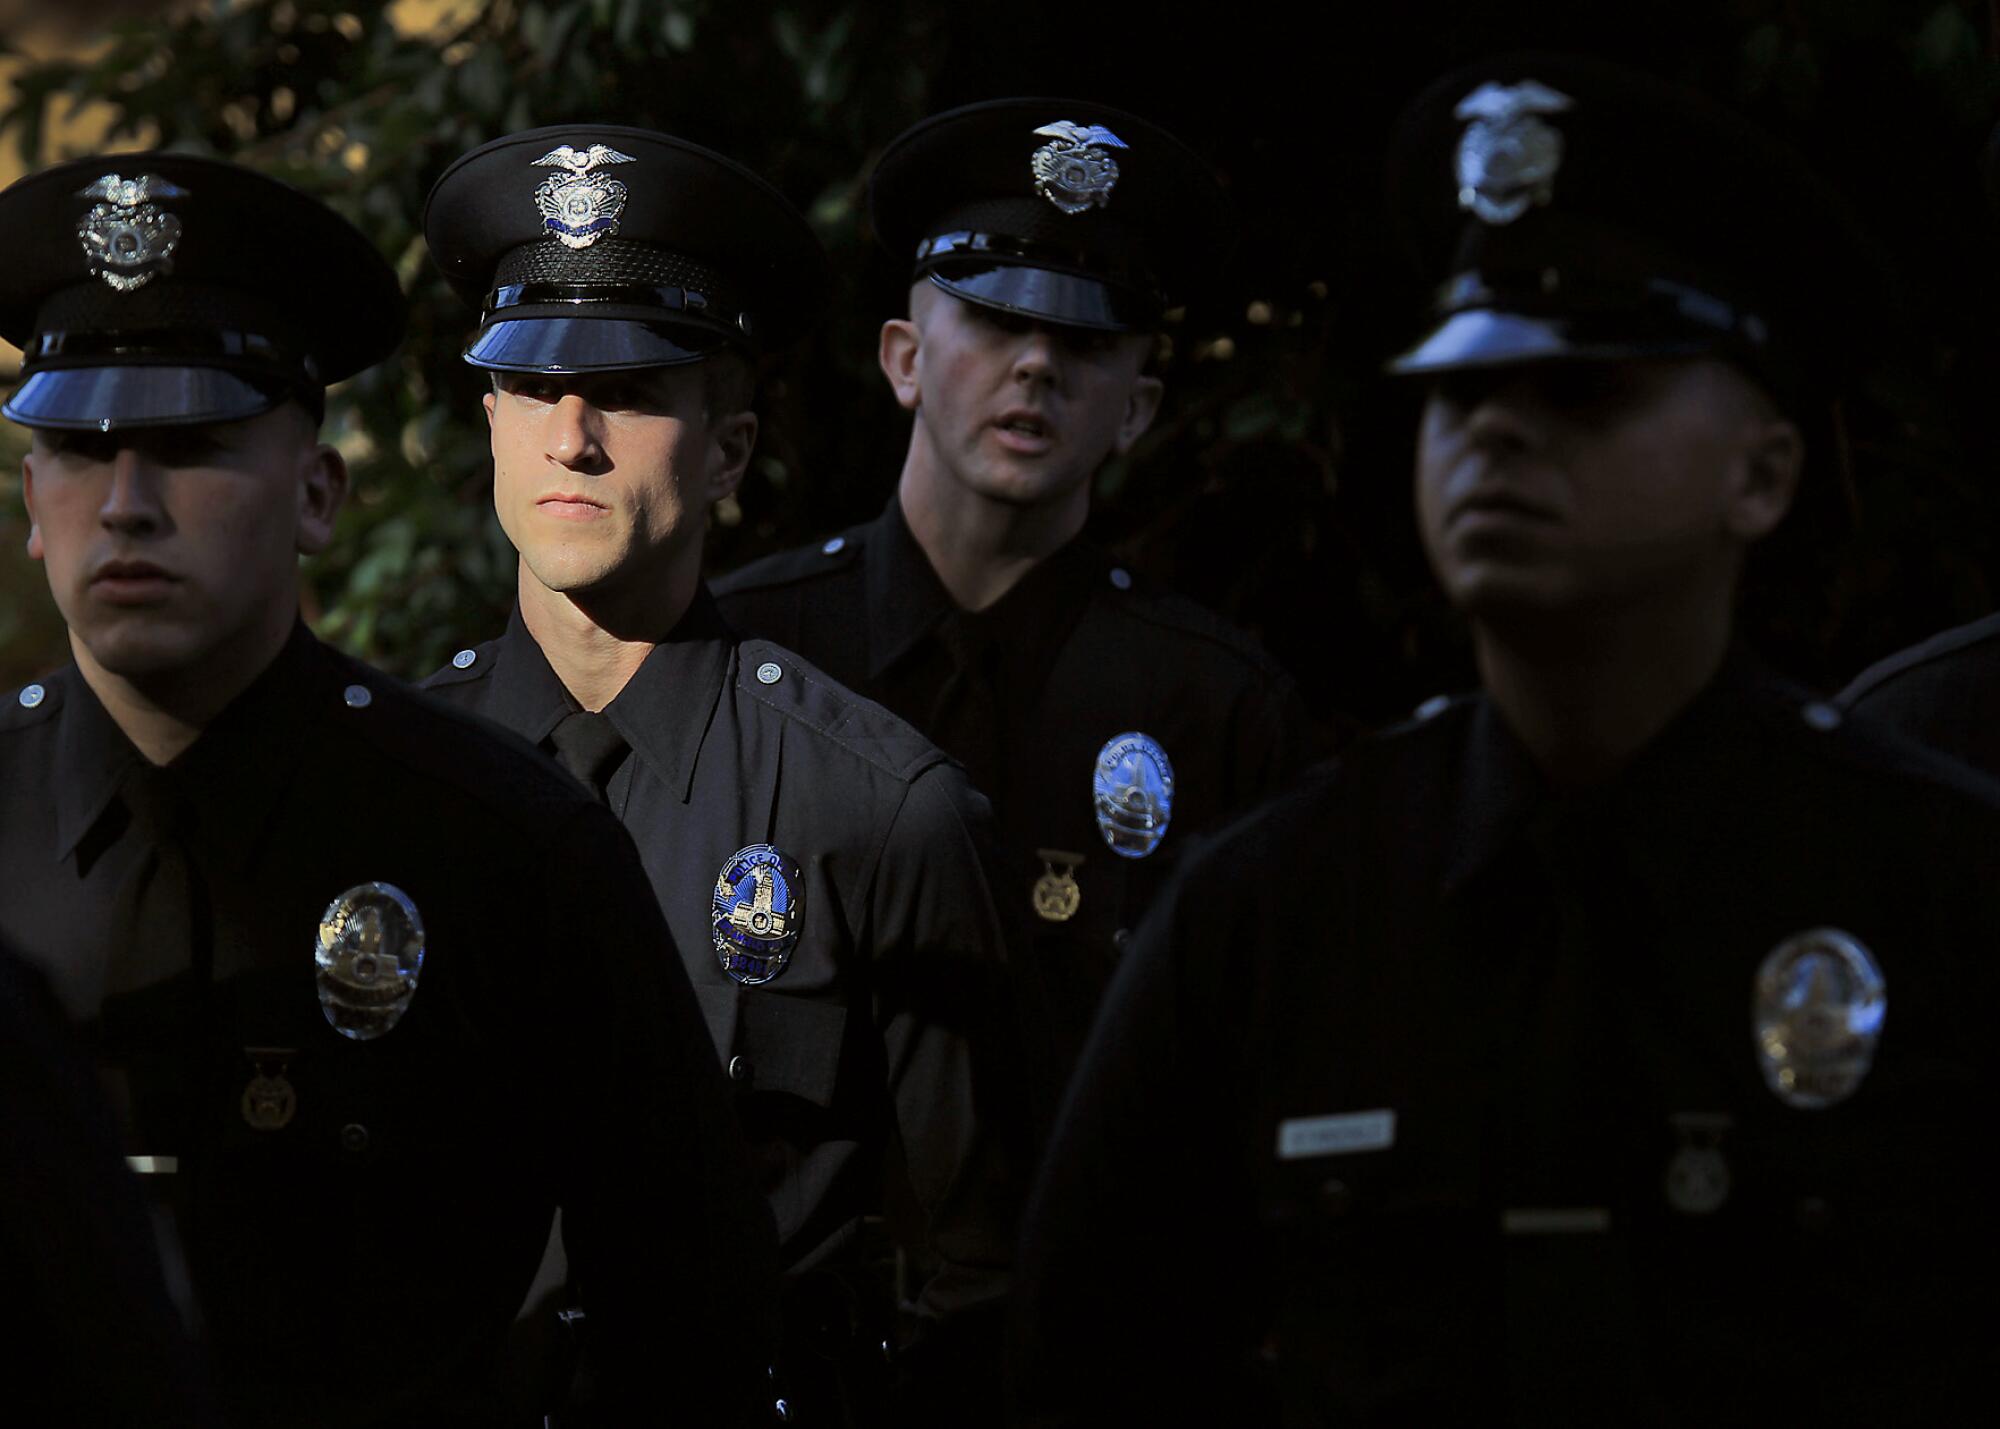 Four LAPD officers stands together, one partially lighted by sunlight.